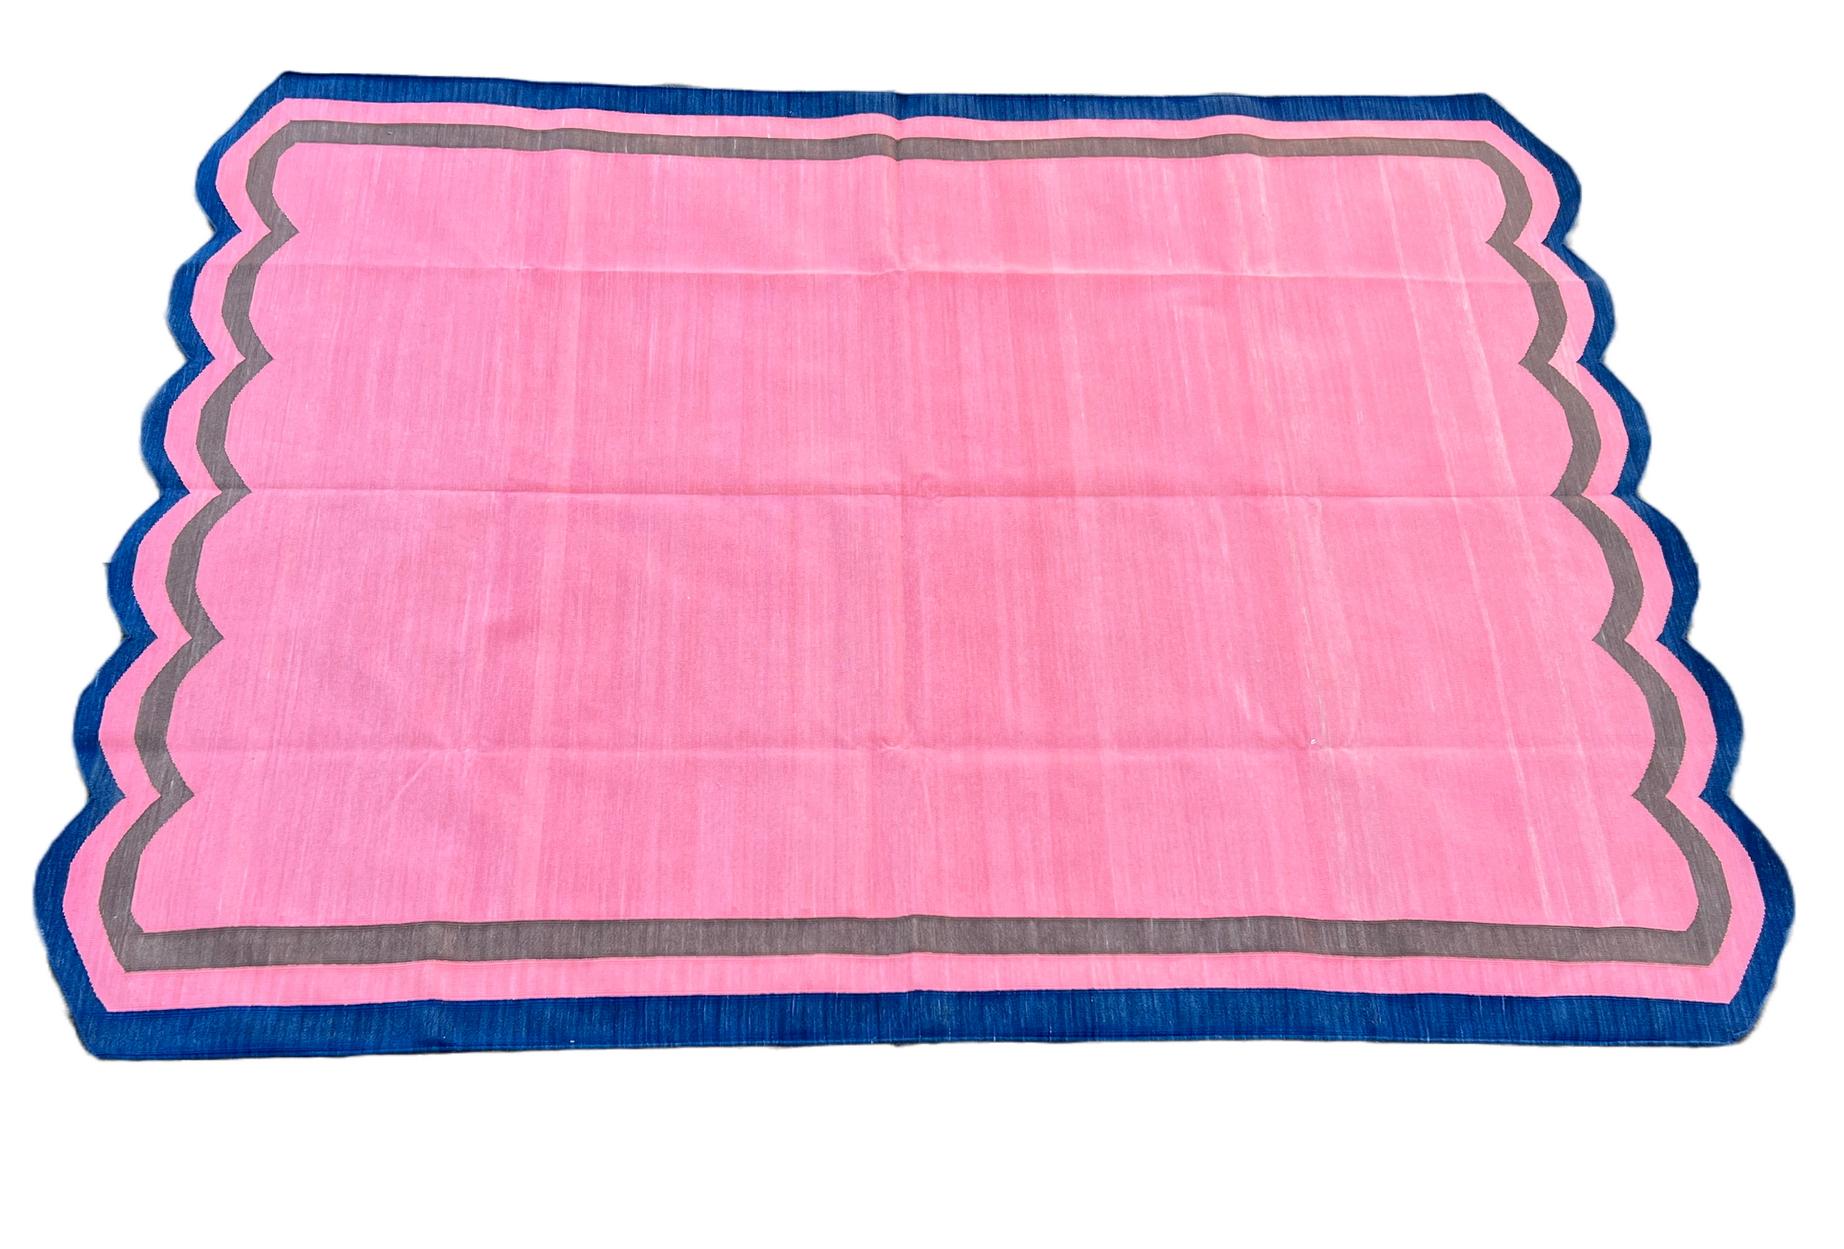 Handmade Cotton Area Flat Weave Rug, 6x8 Pink And Blue Scalloped Striped Dhurrie For Sale 2